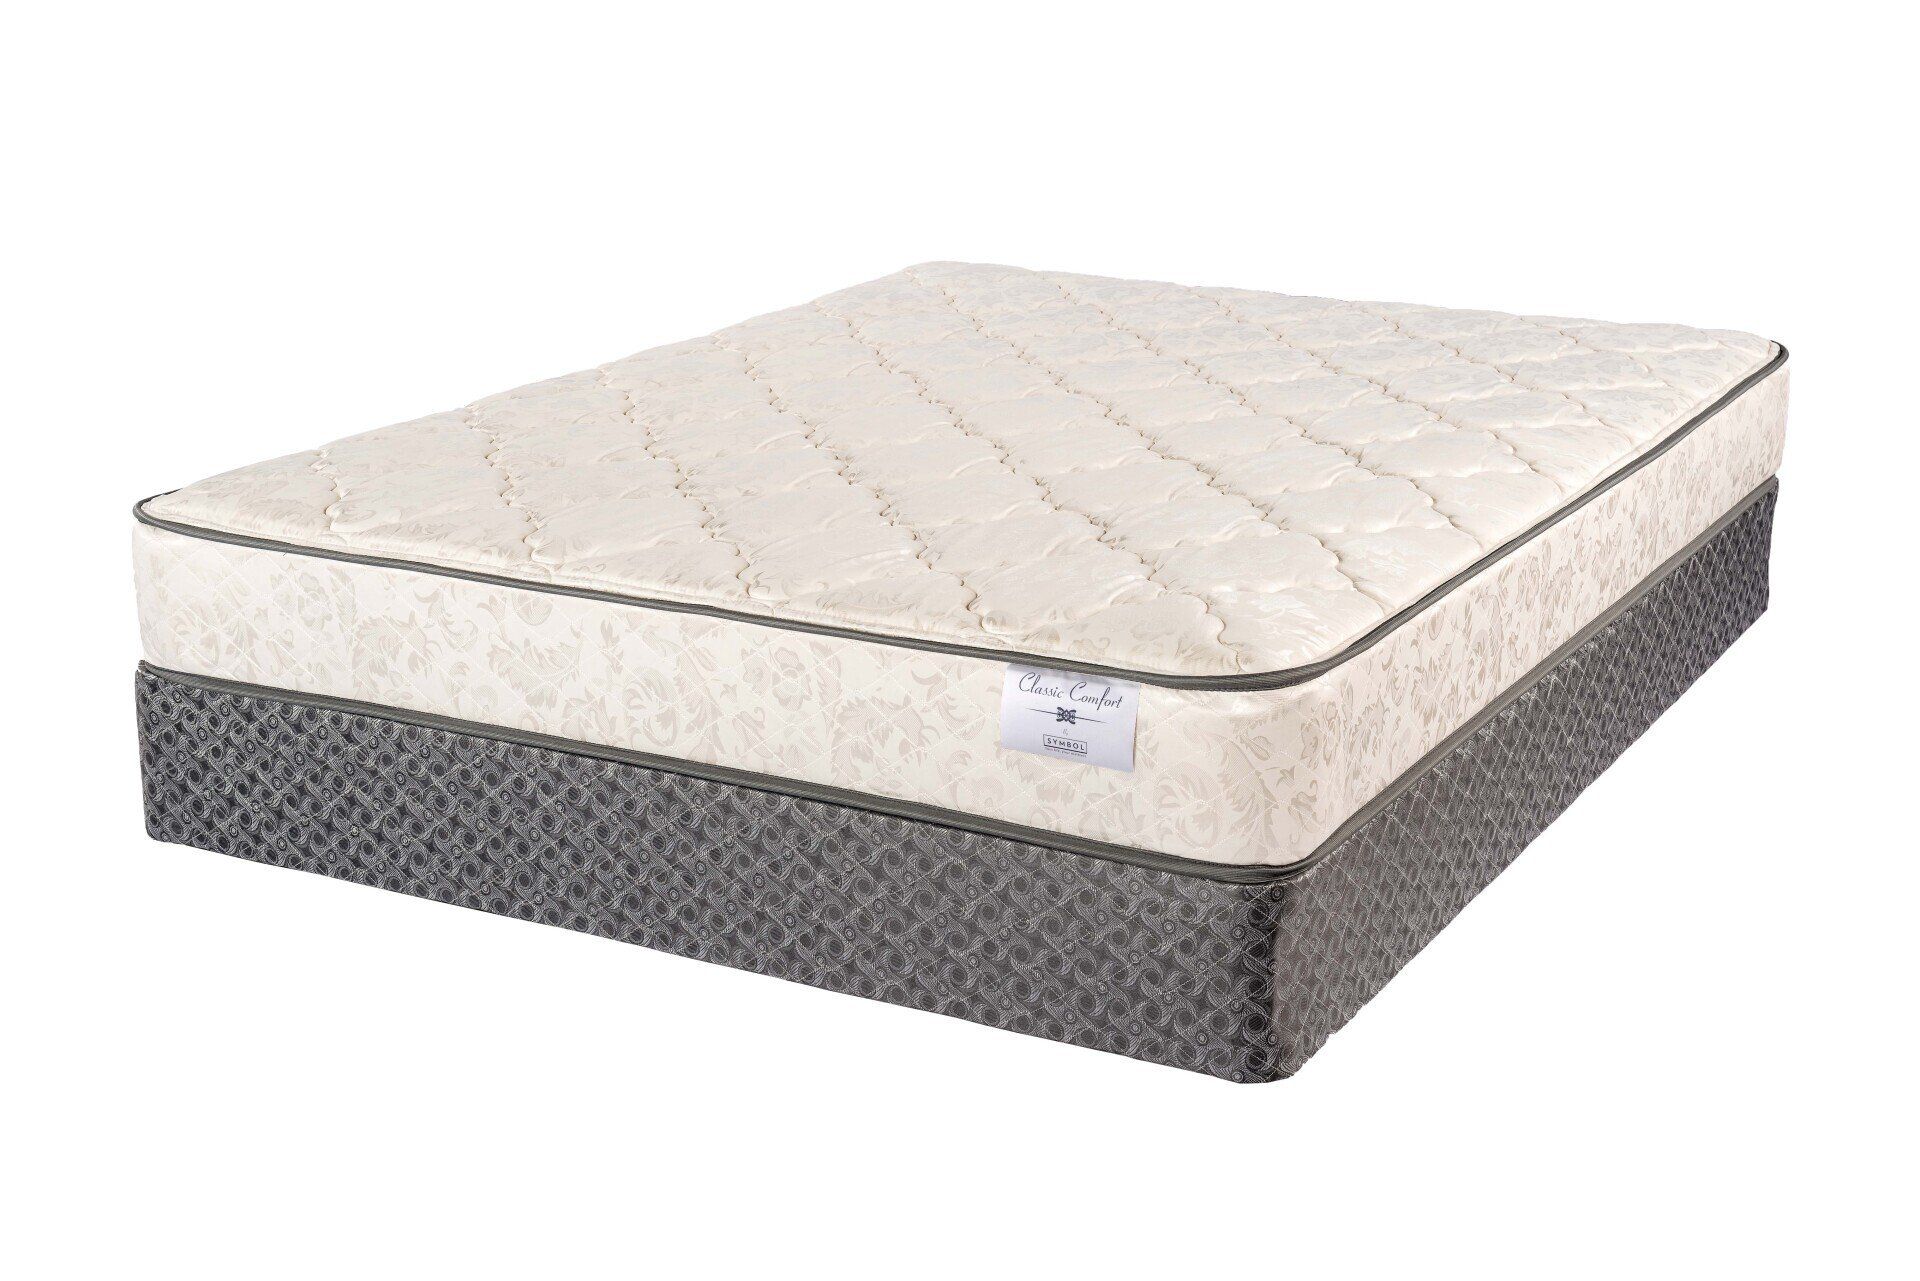 mattresses and furniture in oklahoma city